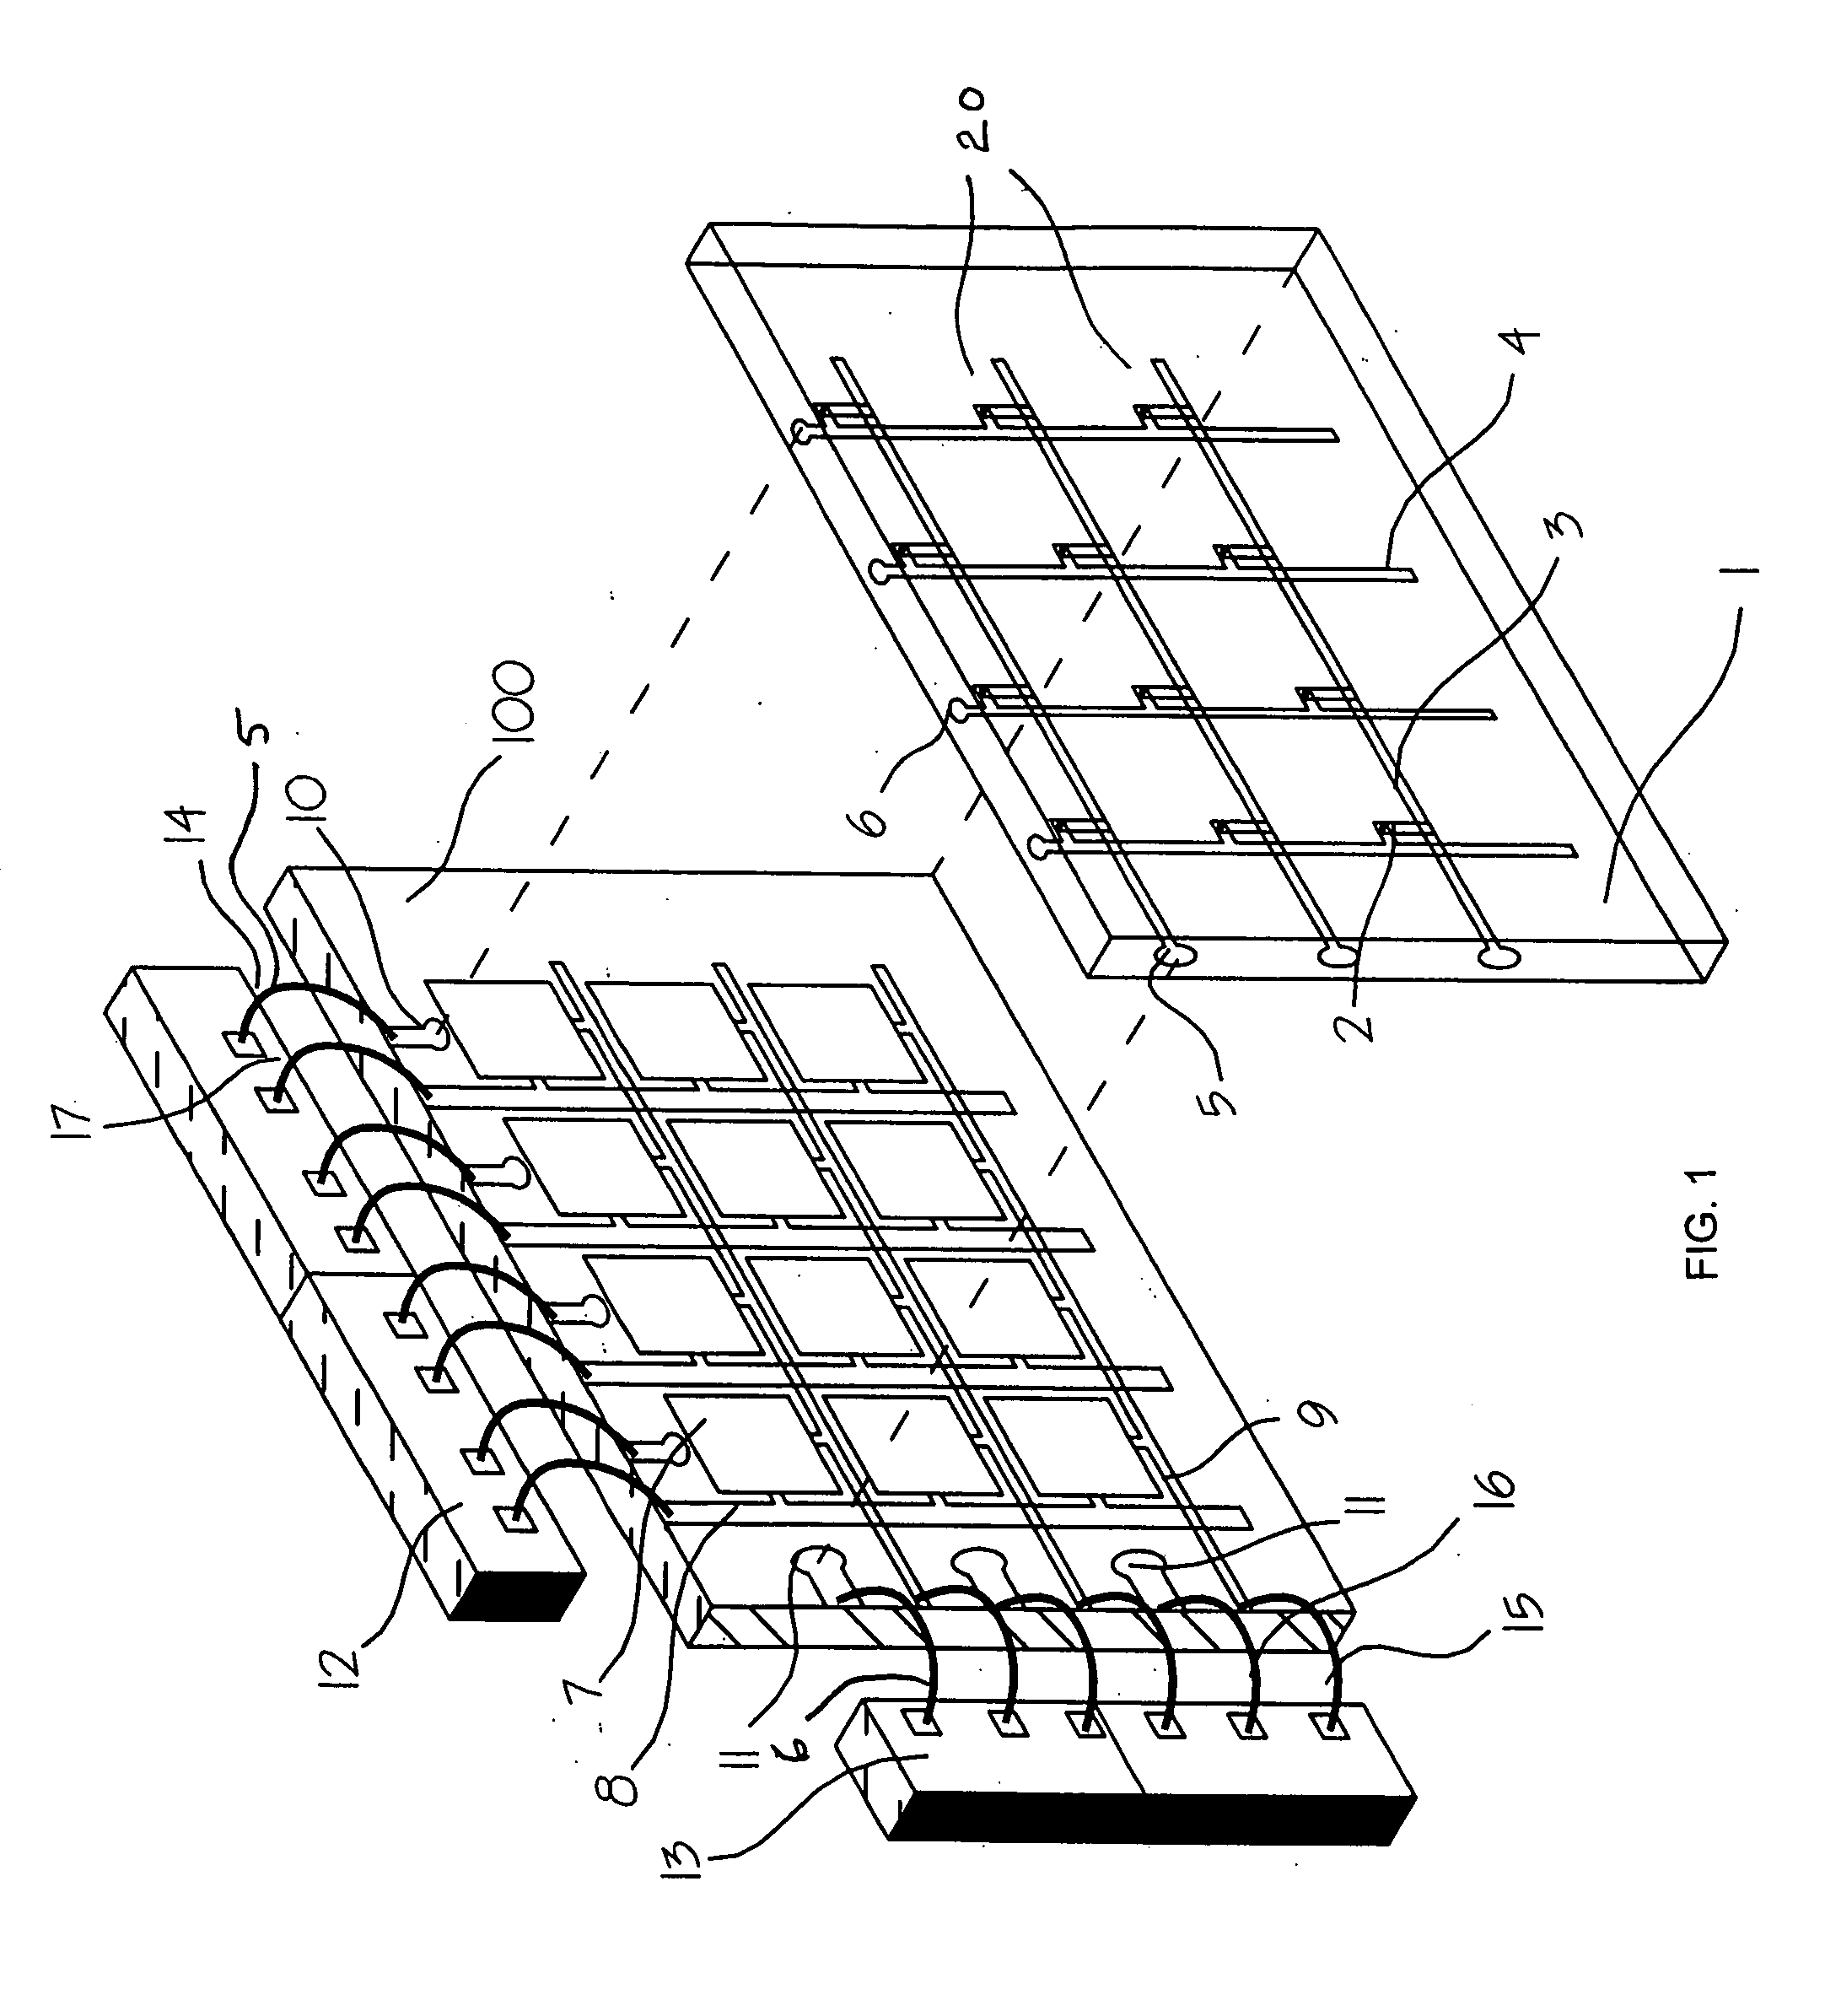 Penlight and touch screen data input system and method for flat panel displays